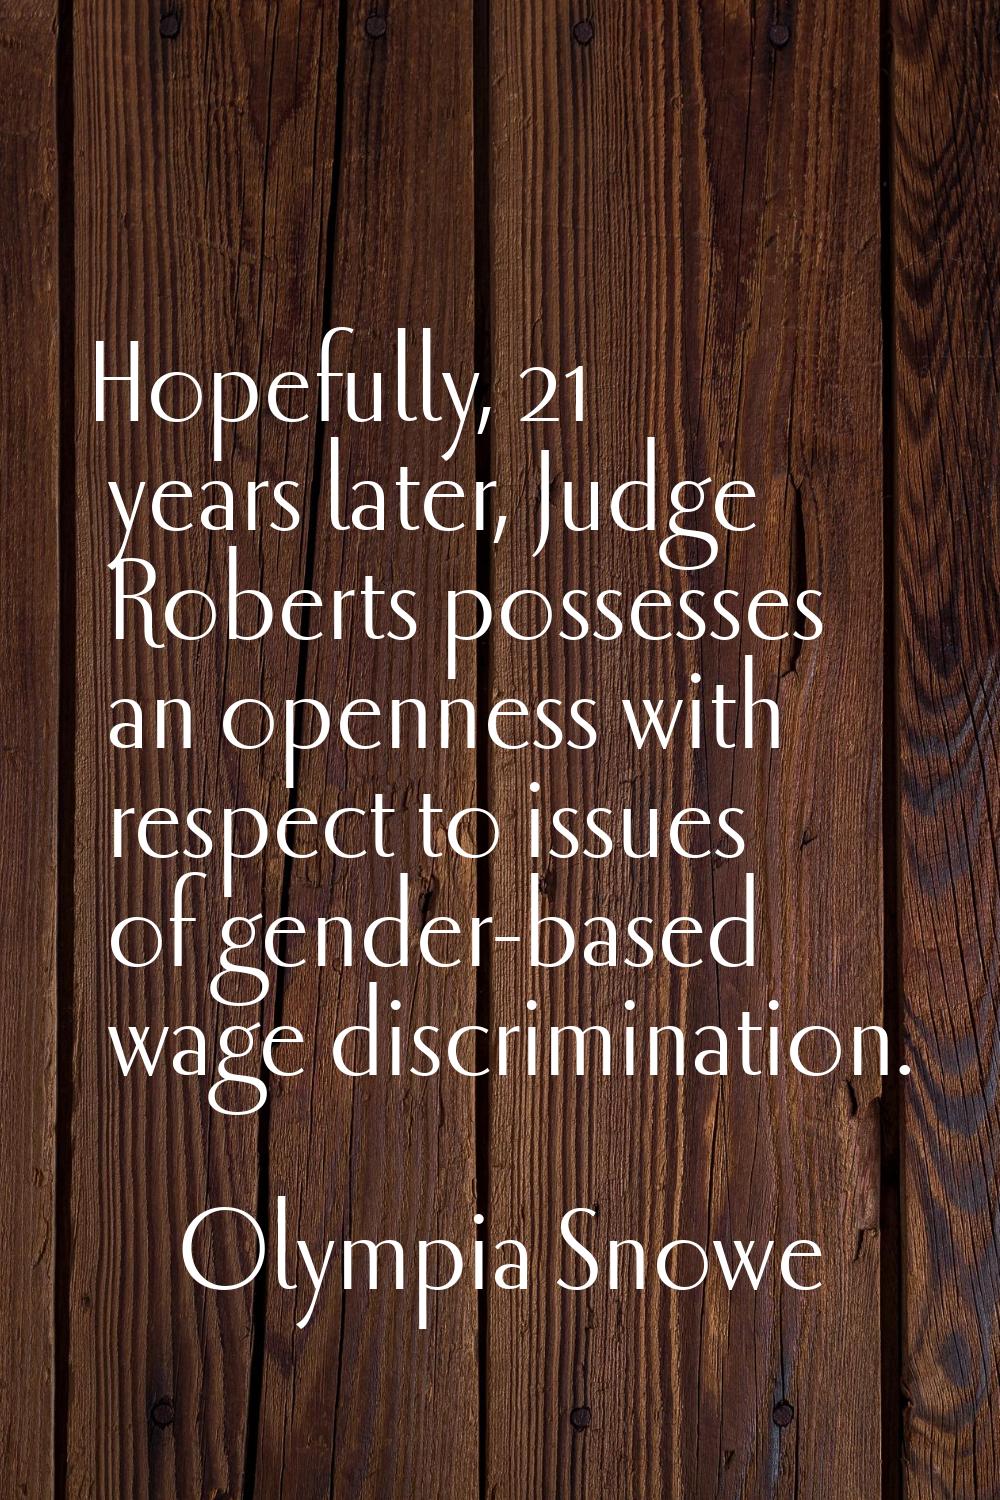 Hopefully, 21 years later, Judge Roberts possesses an openness with respect to issues of gender-bas